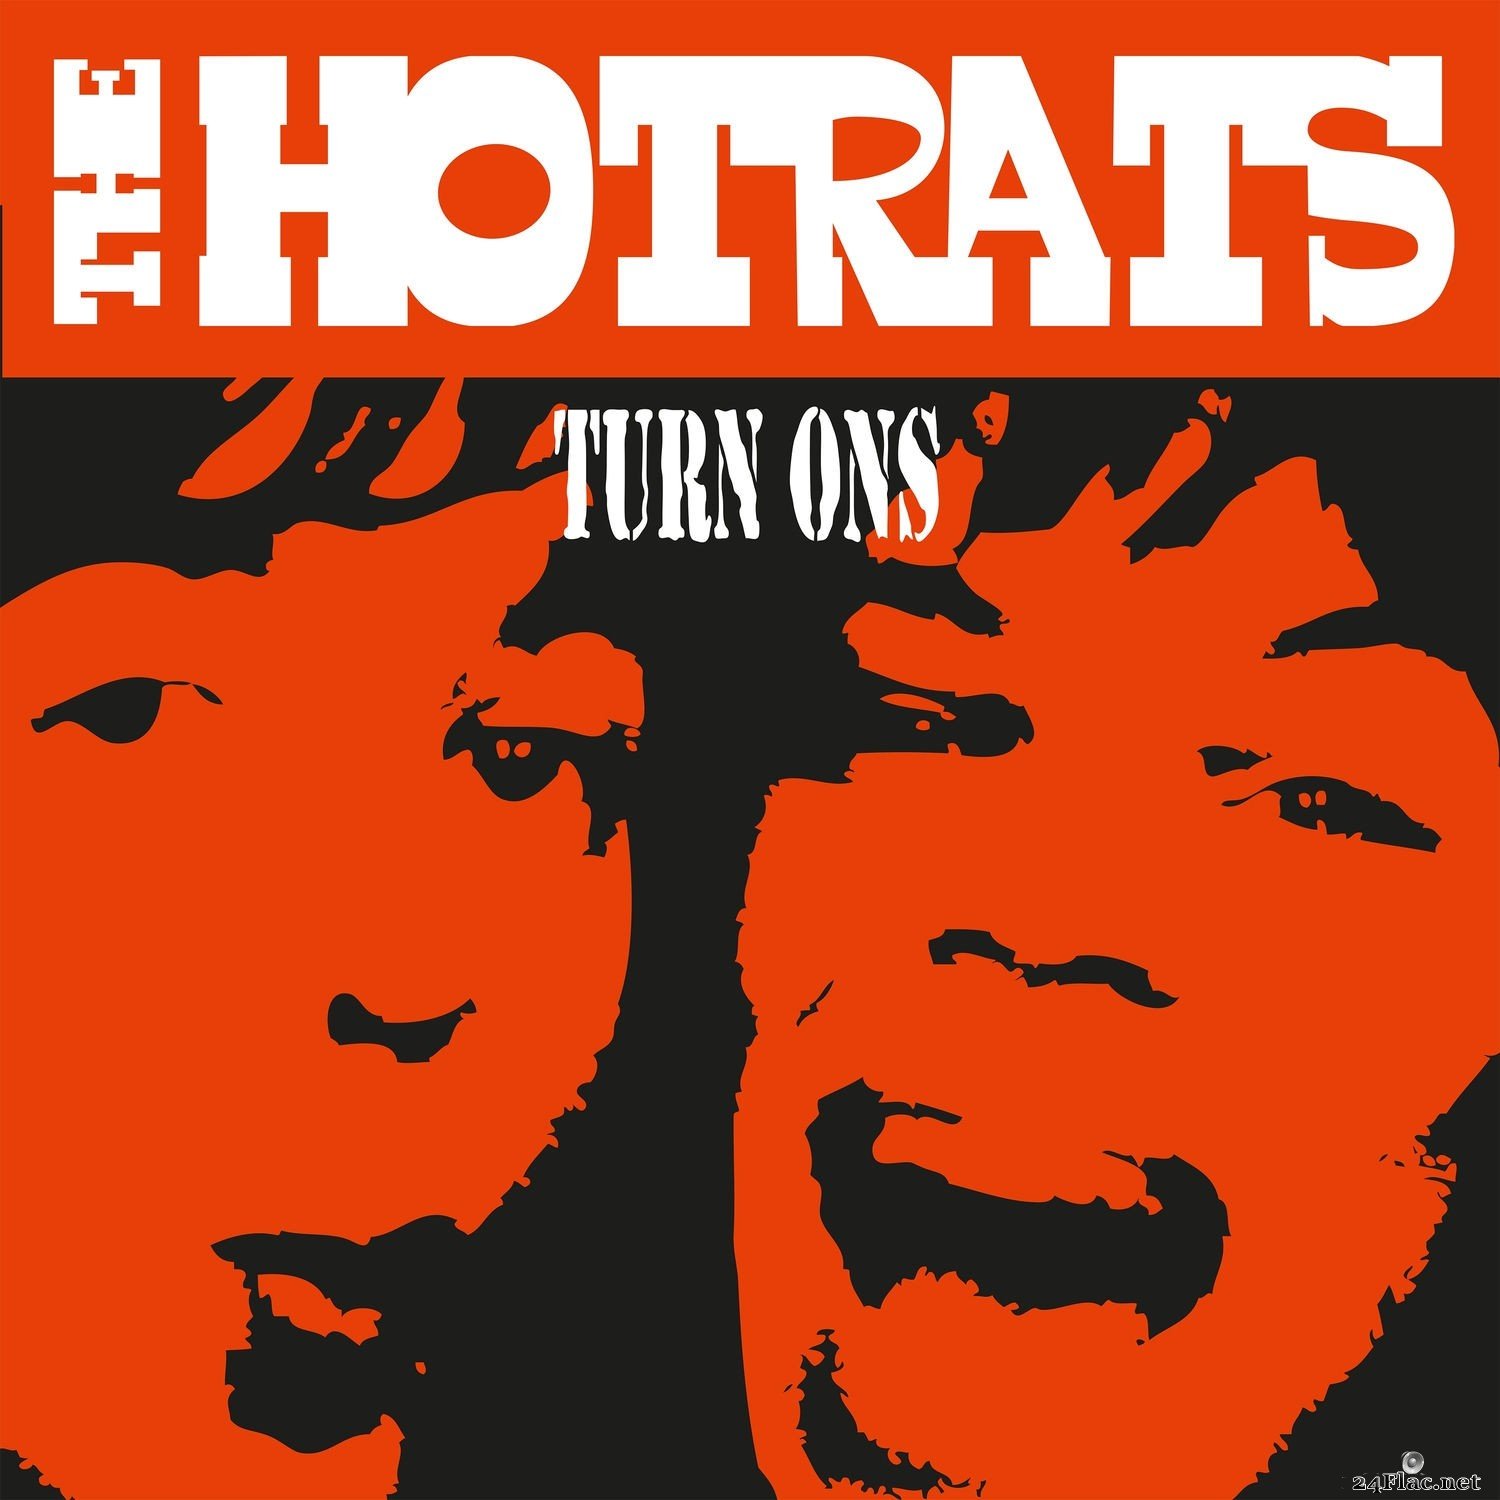 The Hotrats - Turn Ons (10th Anniversary Deluxe Edition) (2020) FLAC